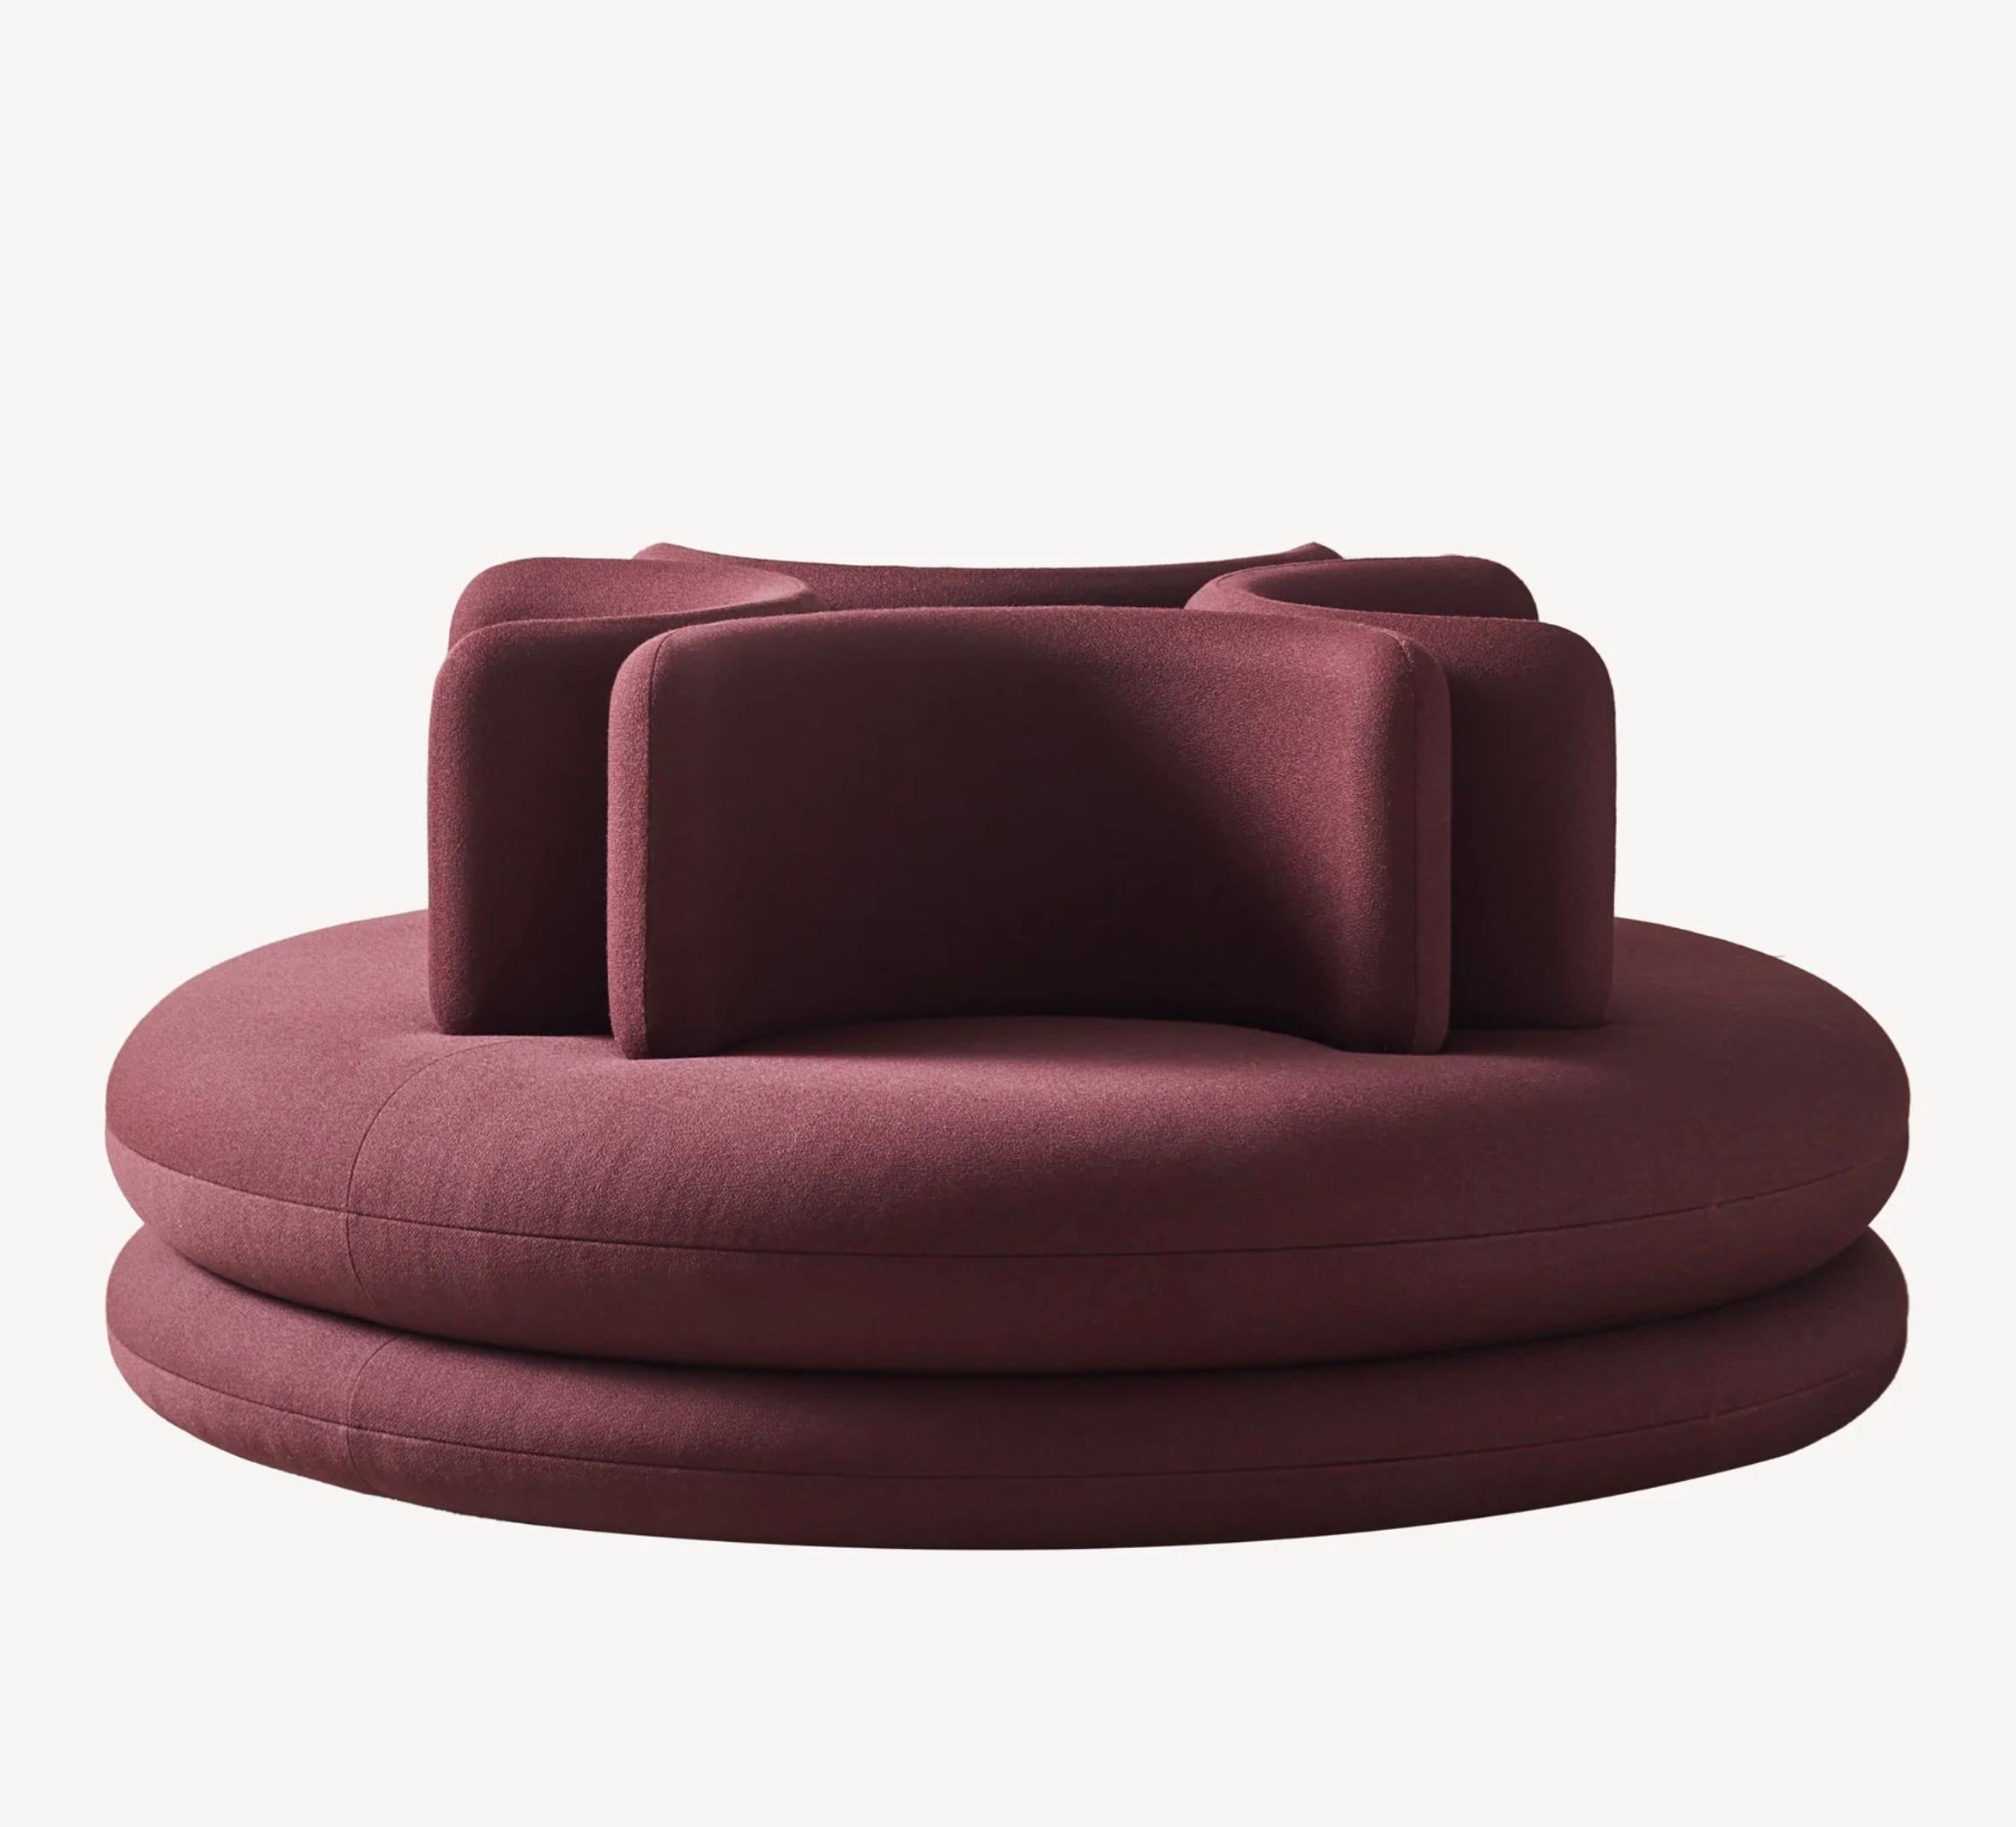 Verner Panton 'Easy' sofa for Verpan. Designed in 1963. New, current production.

With its round shapes and layered design, the Easy collection stands out as one of the most visually distinctive pieces of the Verner Panton design catalogue.

The